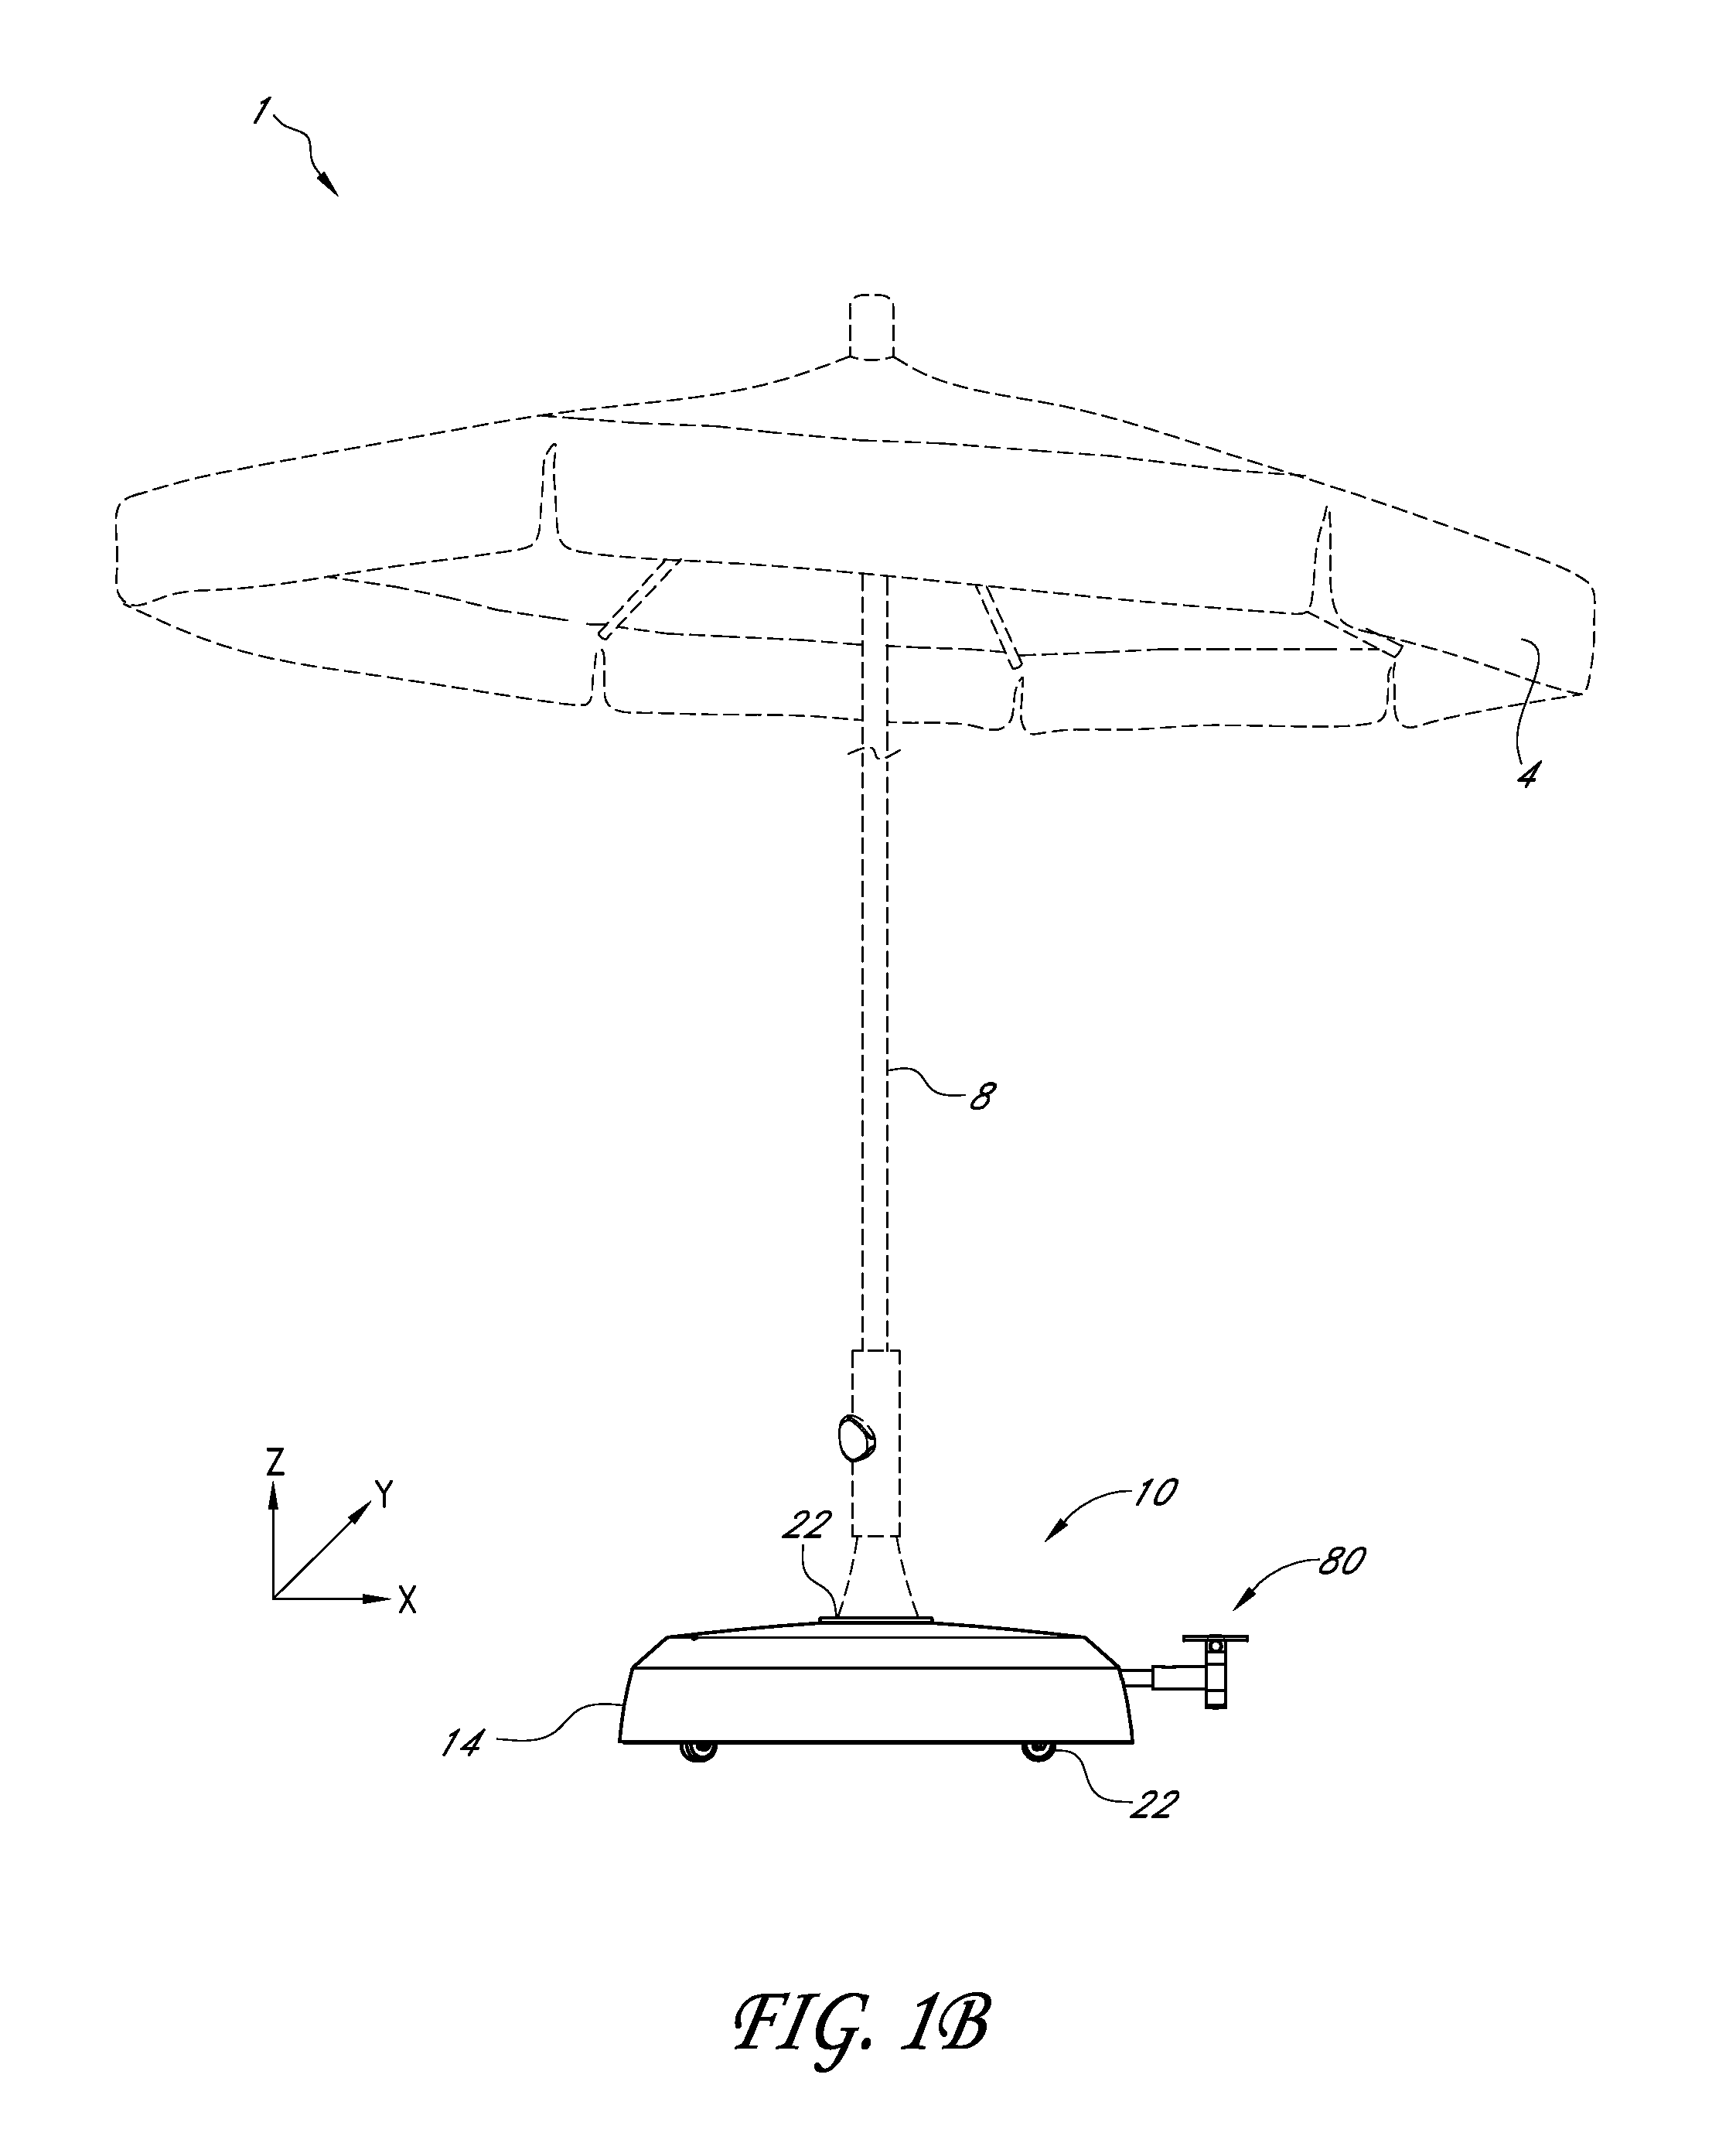 Movable base with wheels deployable by reversible driving assembly